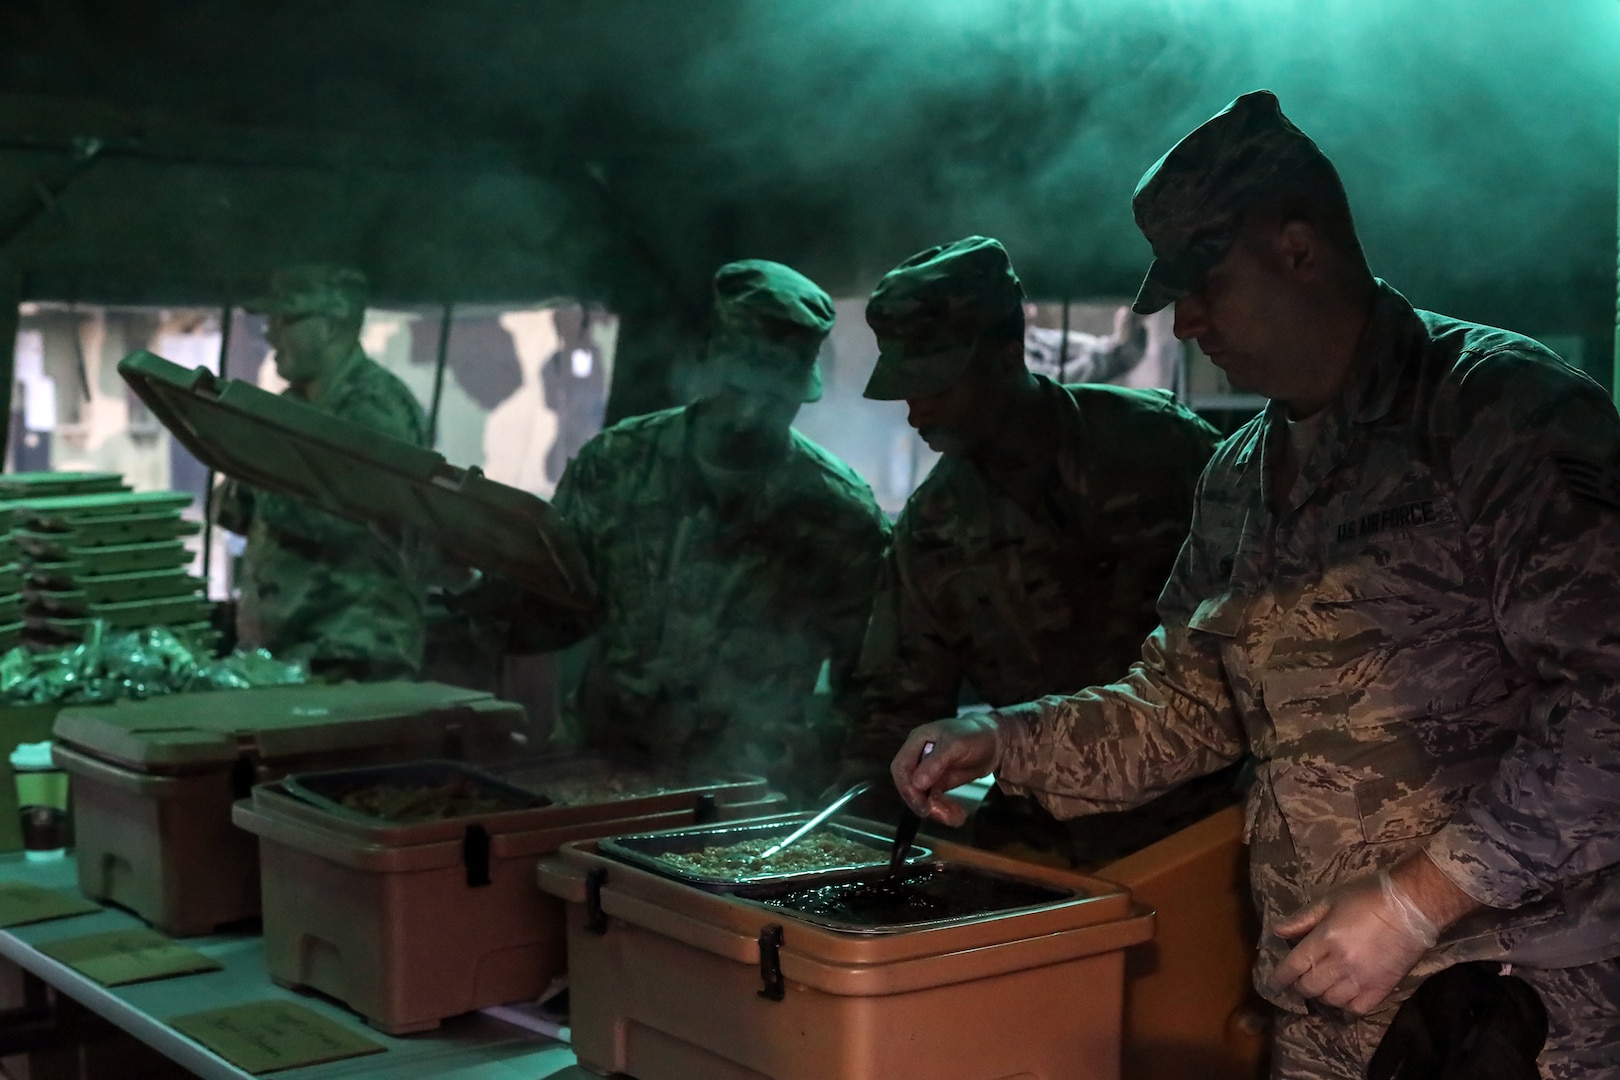 Members of the 445th Force Support Squadron serve breakfast during the 445th Airlift Wing’s annual Agile Combat Support exercise at the Warfighter Training Center April 7, 2019.